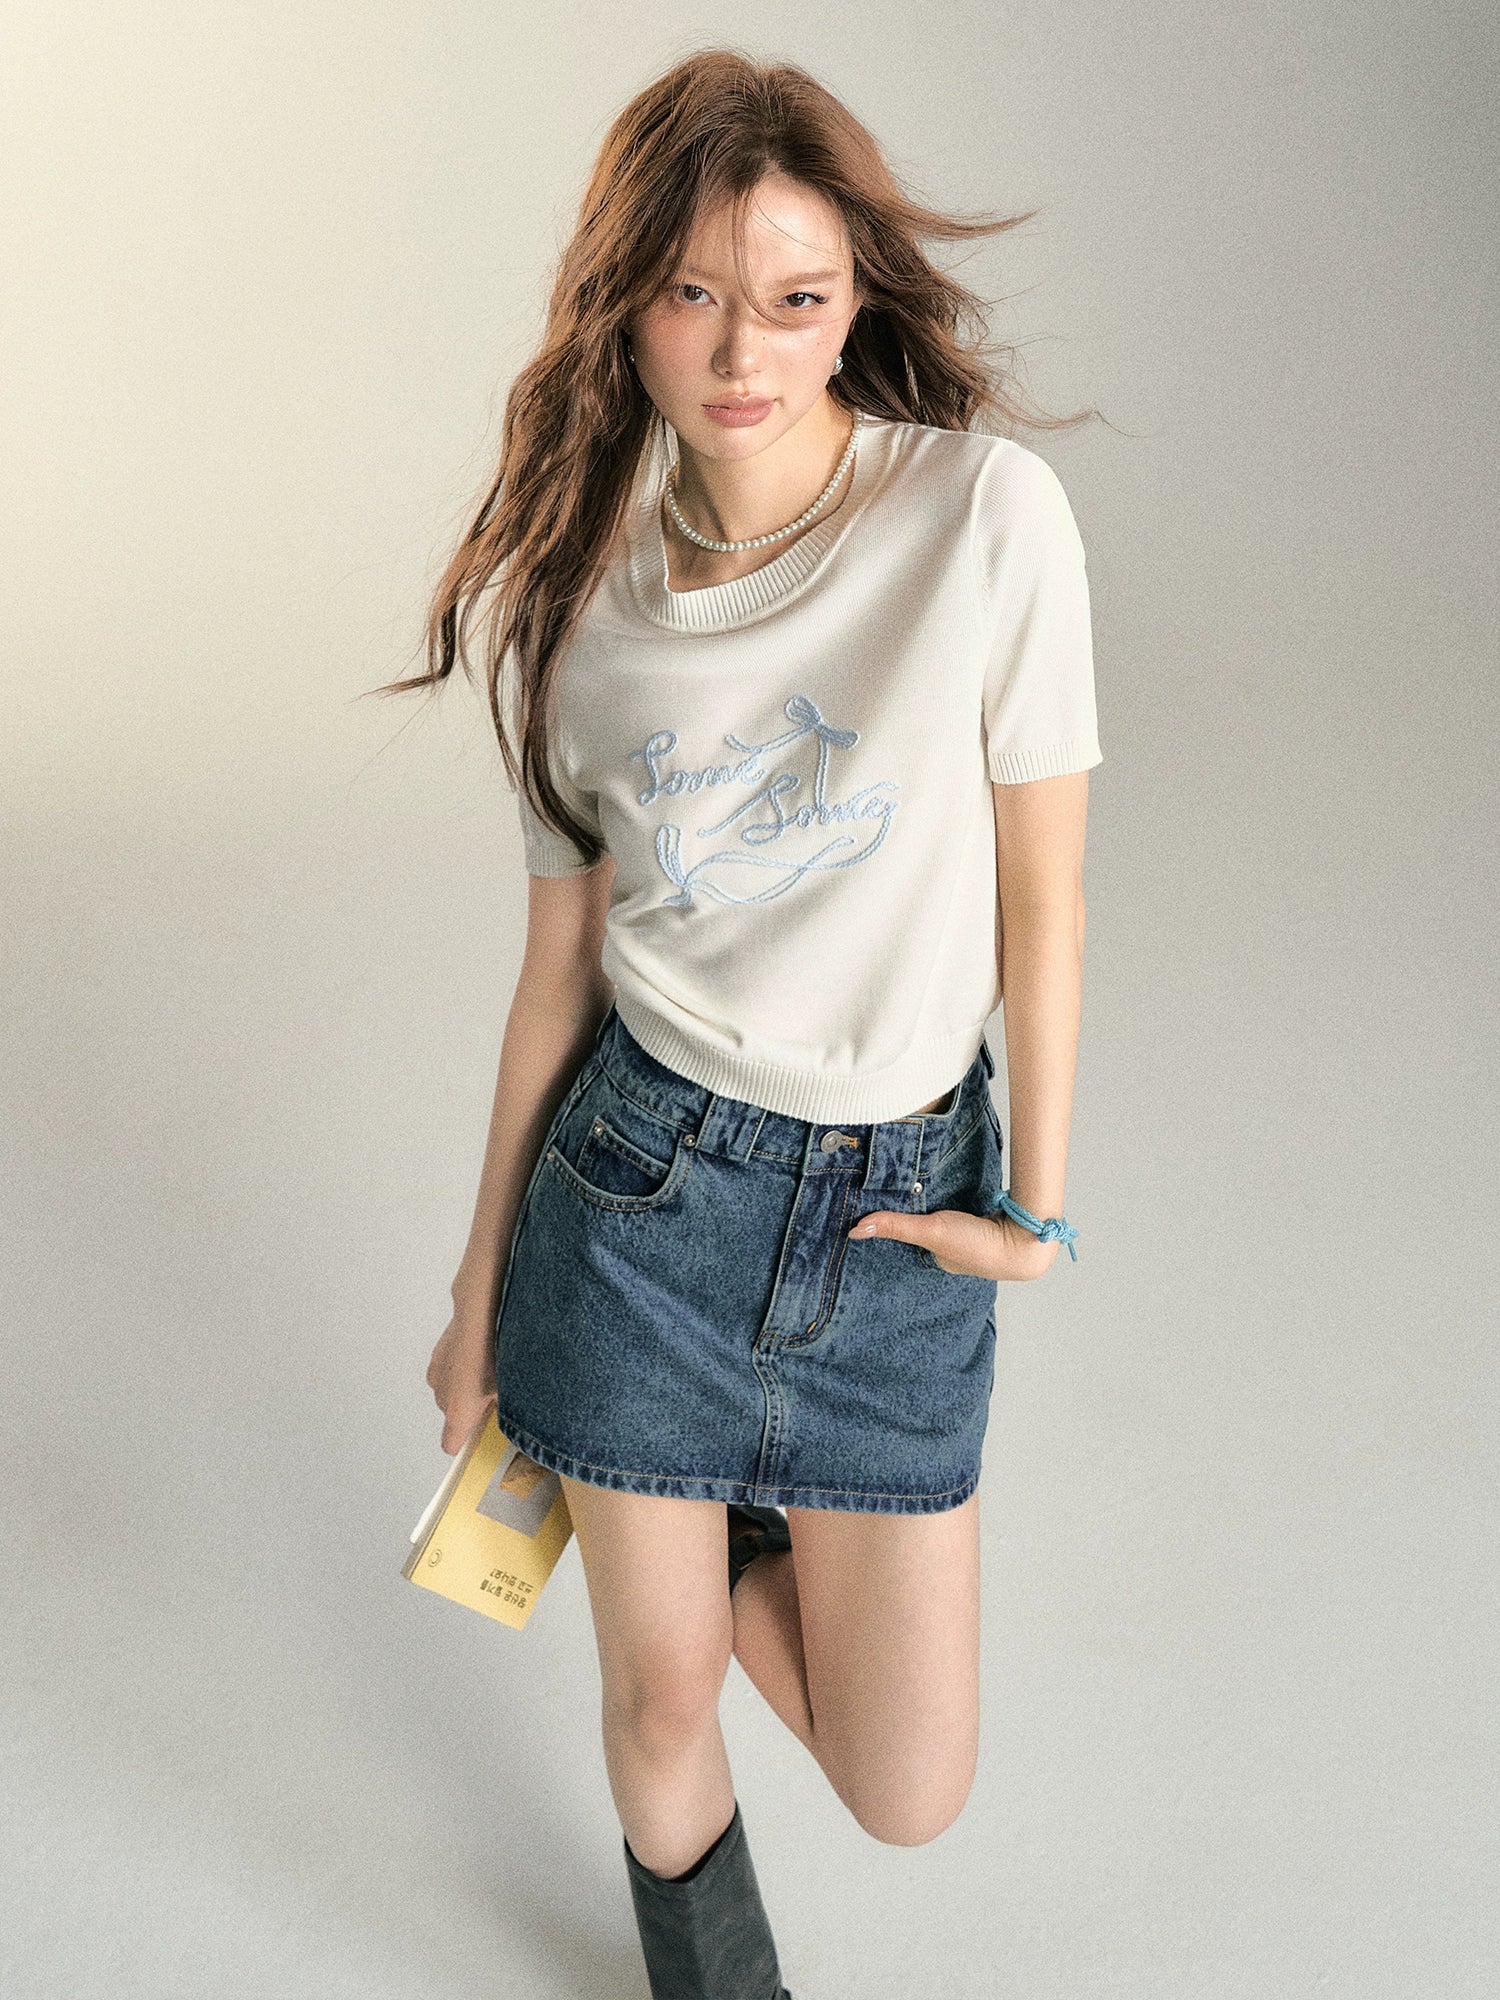 Yellow &amp; White Bow Embroidered Knit T-shirt